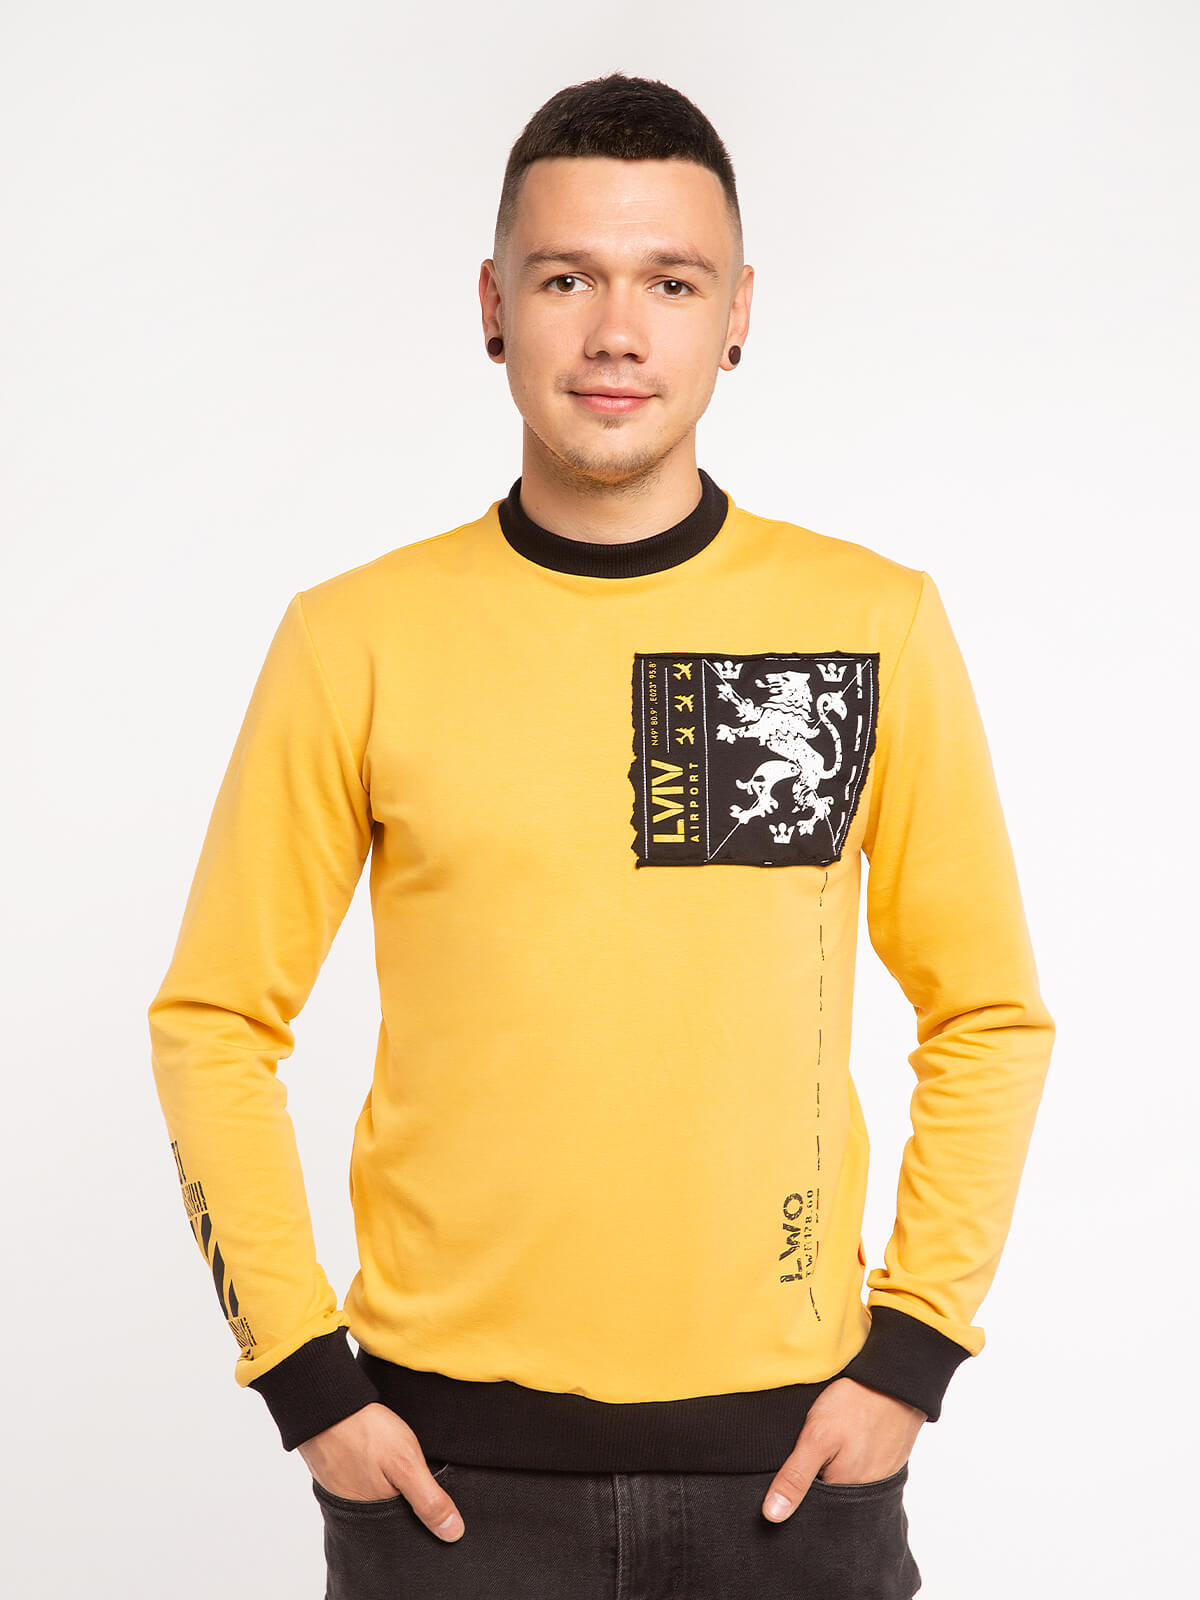 Men's Long Sleeves Have A Nice Flight. Color yellow. Material: 97% cotton, 3% spandex.